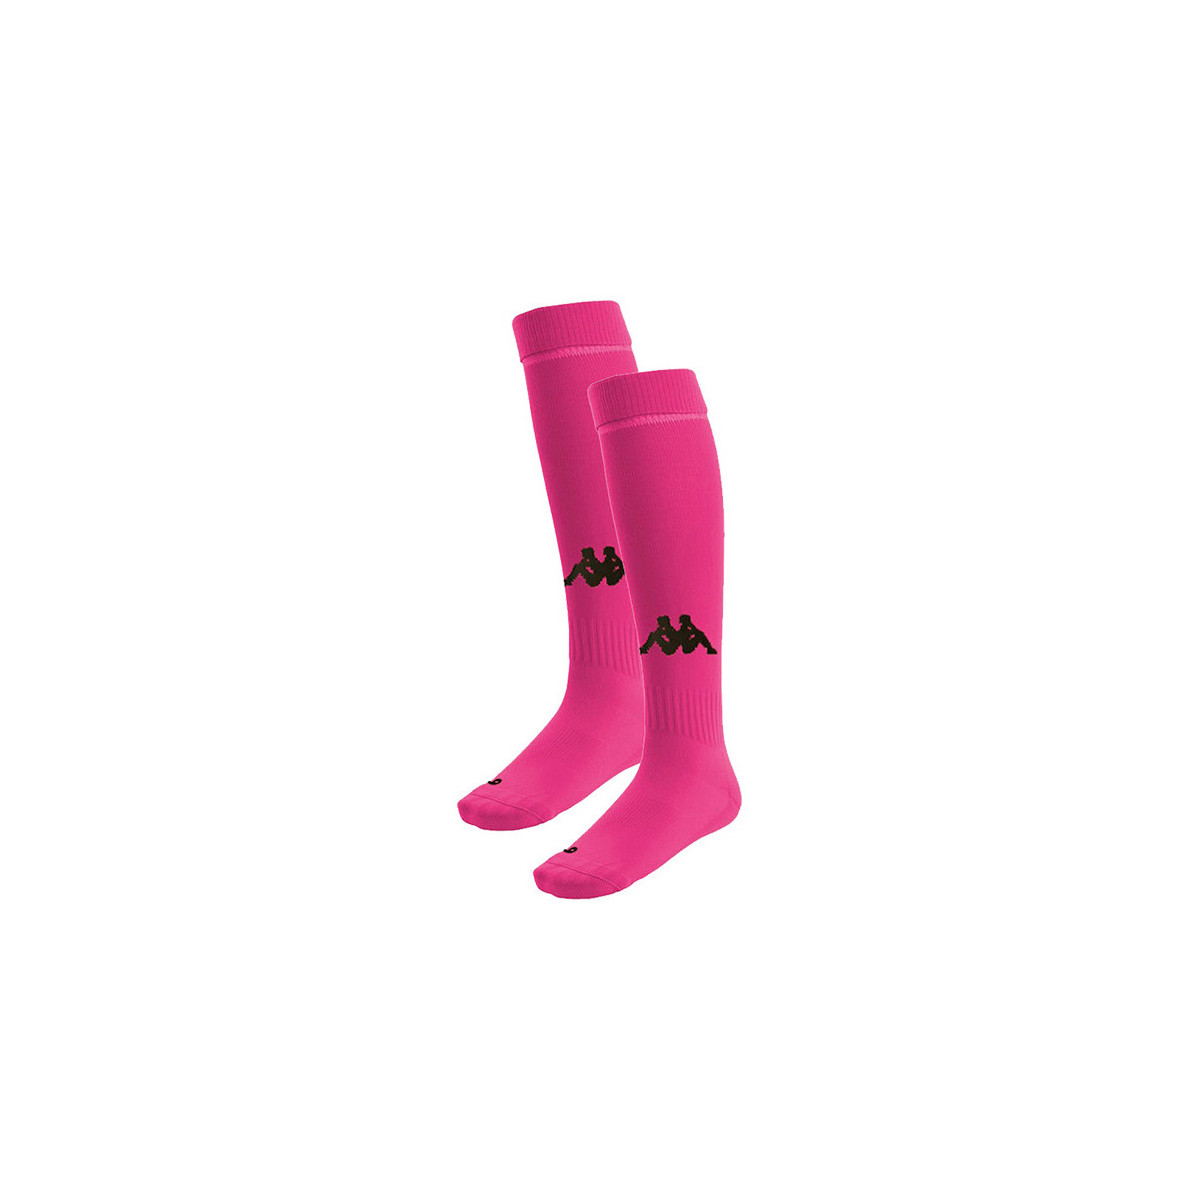 Kappa Rose Chaussettes Penao (3 paires) b1uzkxCP